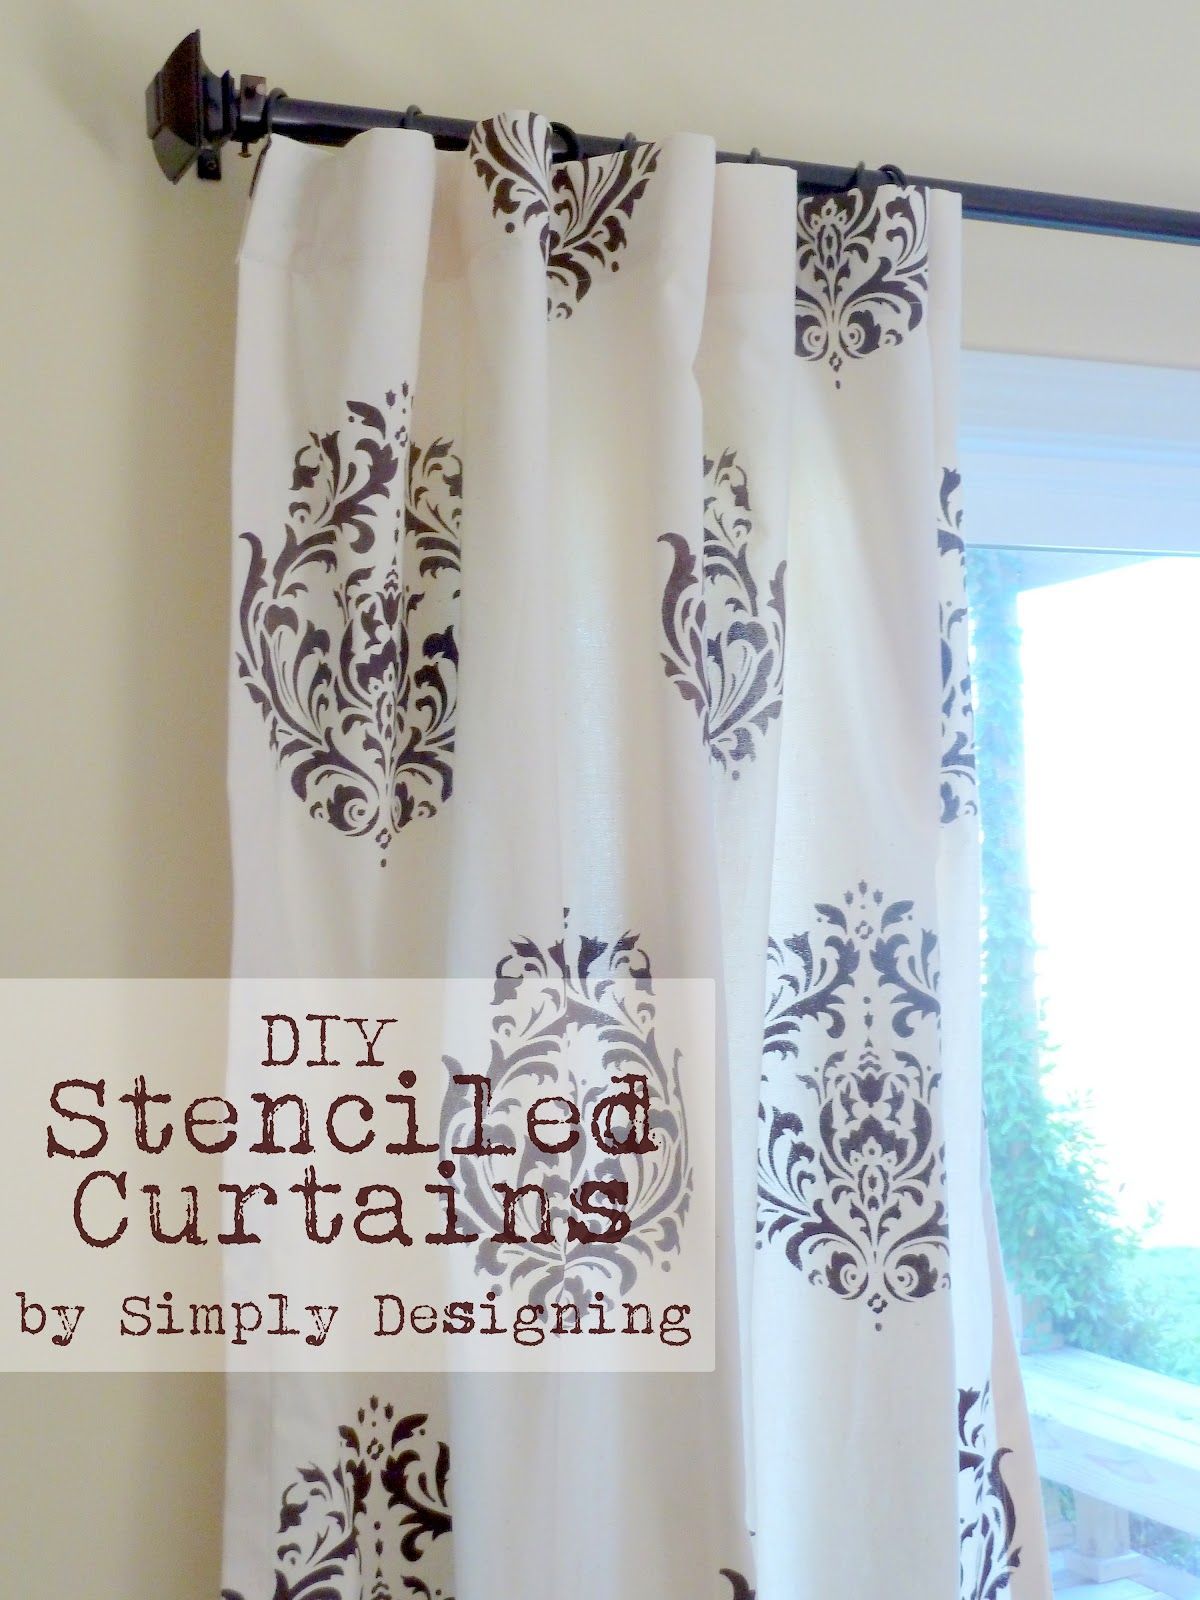 Simply Designing with Ashley: DIY Stenciled Curtains and a {GIVEAWAY} from Cutting Edge Stencils